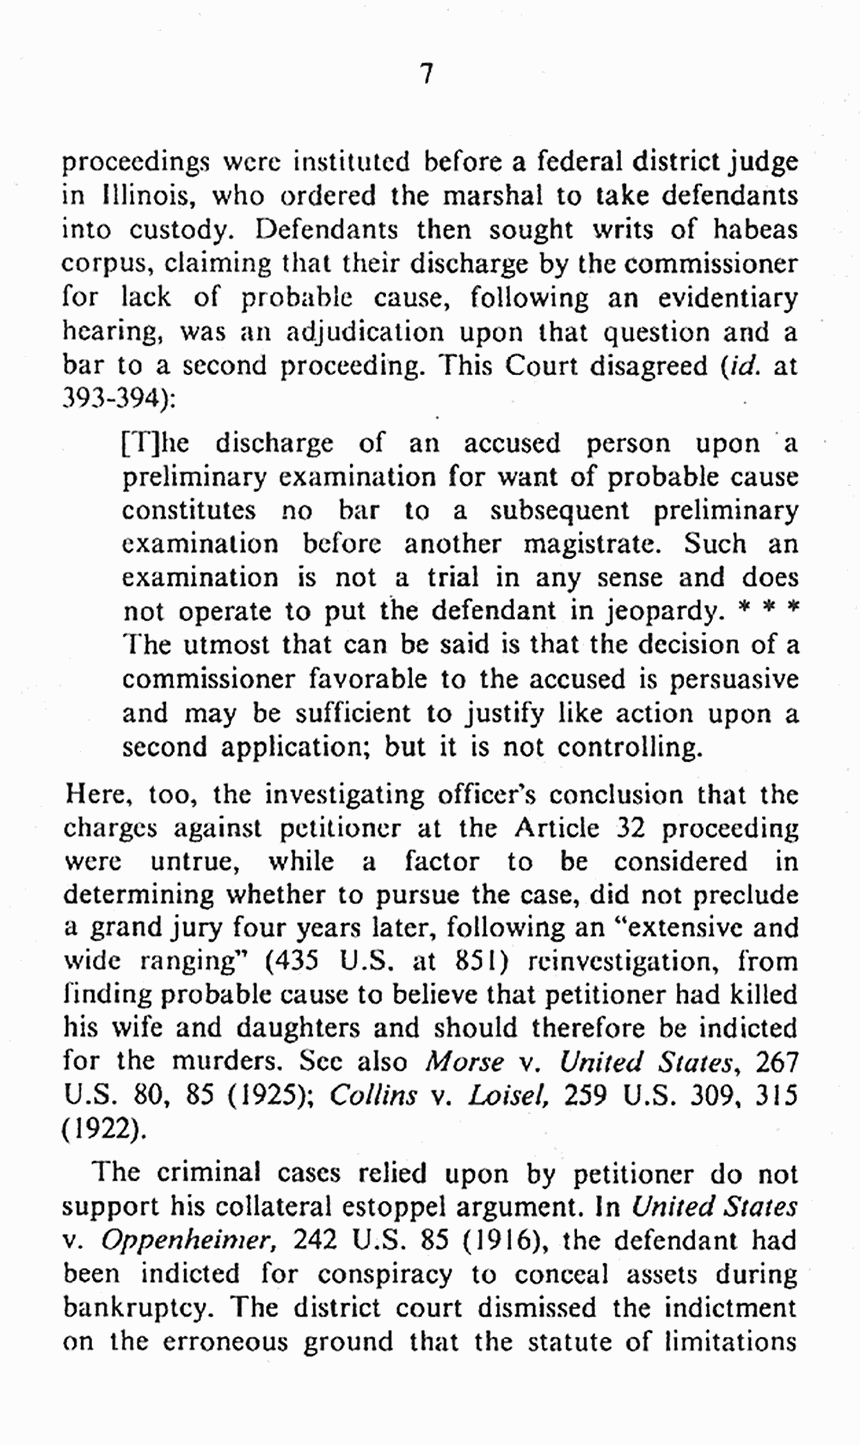 February 1979: Supreme Court of the United States, On Petition for Writ of Certiorari to the U. S. Court of Appeals for the 4th Circuit: Brief for the United States in Opposition, p. 7 of 9